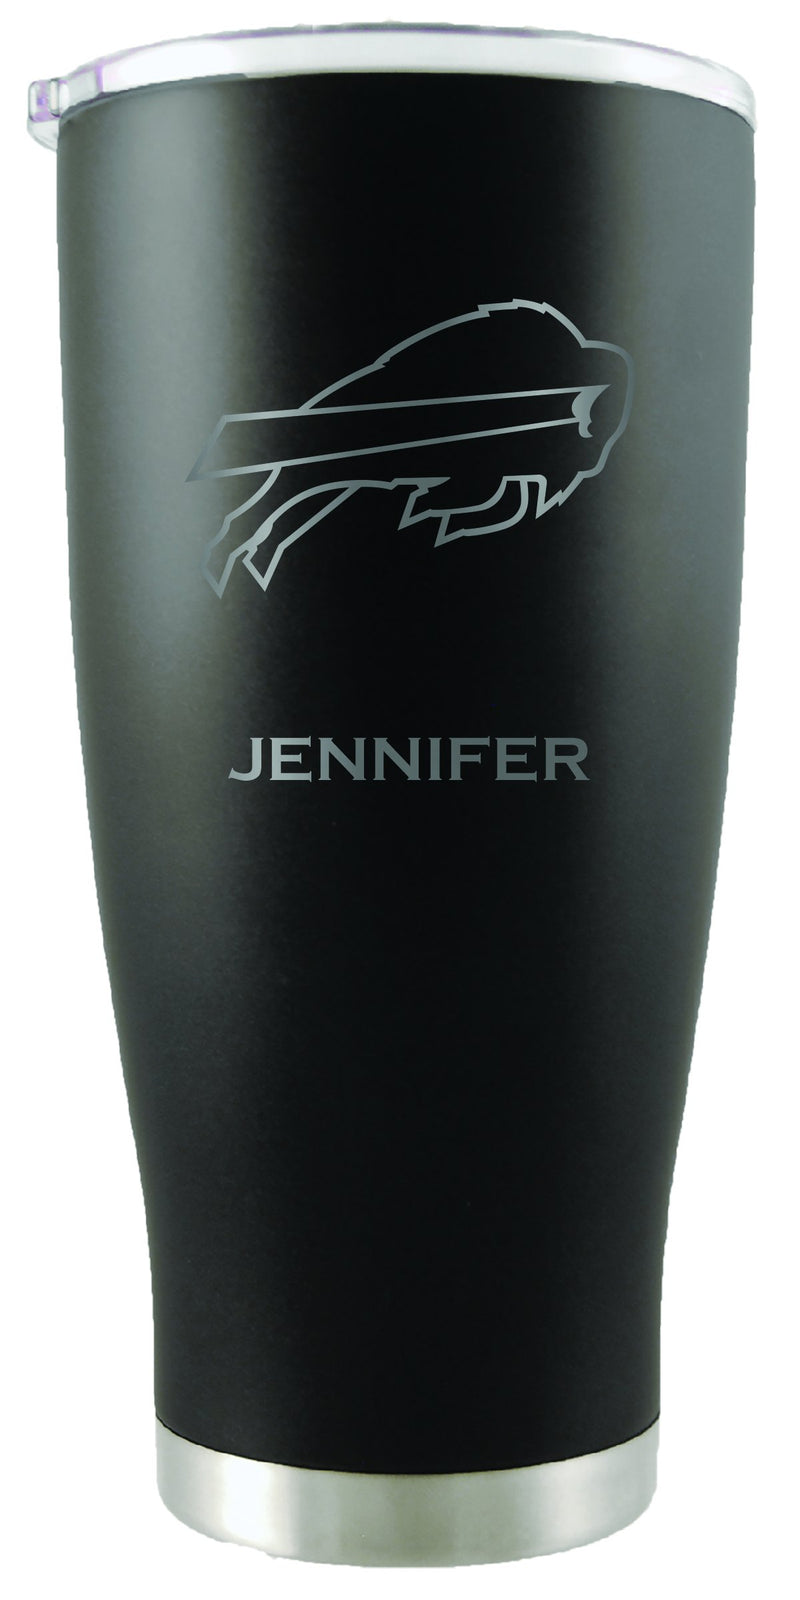 20oz Black Personalized Stainless Steel Tumbler | Buffalo Bills
BUF, Buffalo Bills, CurrentProduct, Drinkware_category_All, NFL, Personalized_Personalized, Stainless Steel
The Memory Company